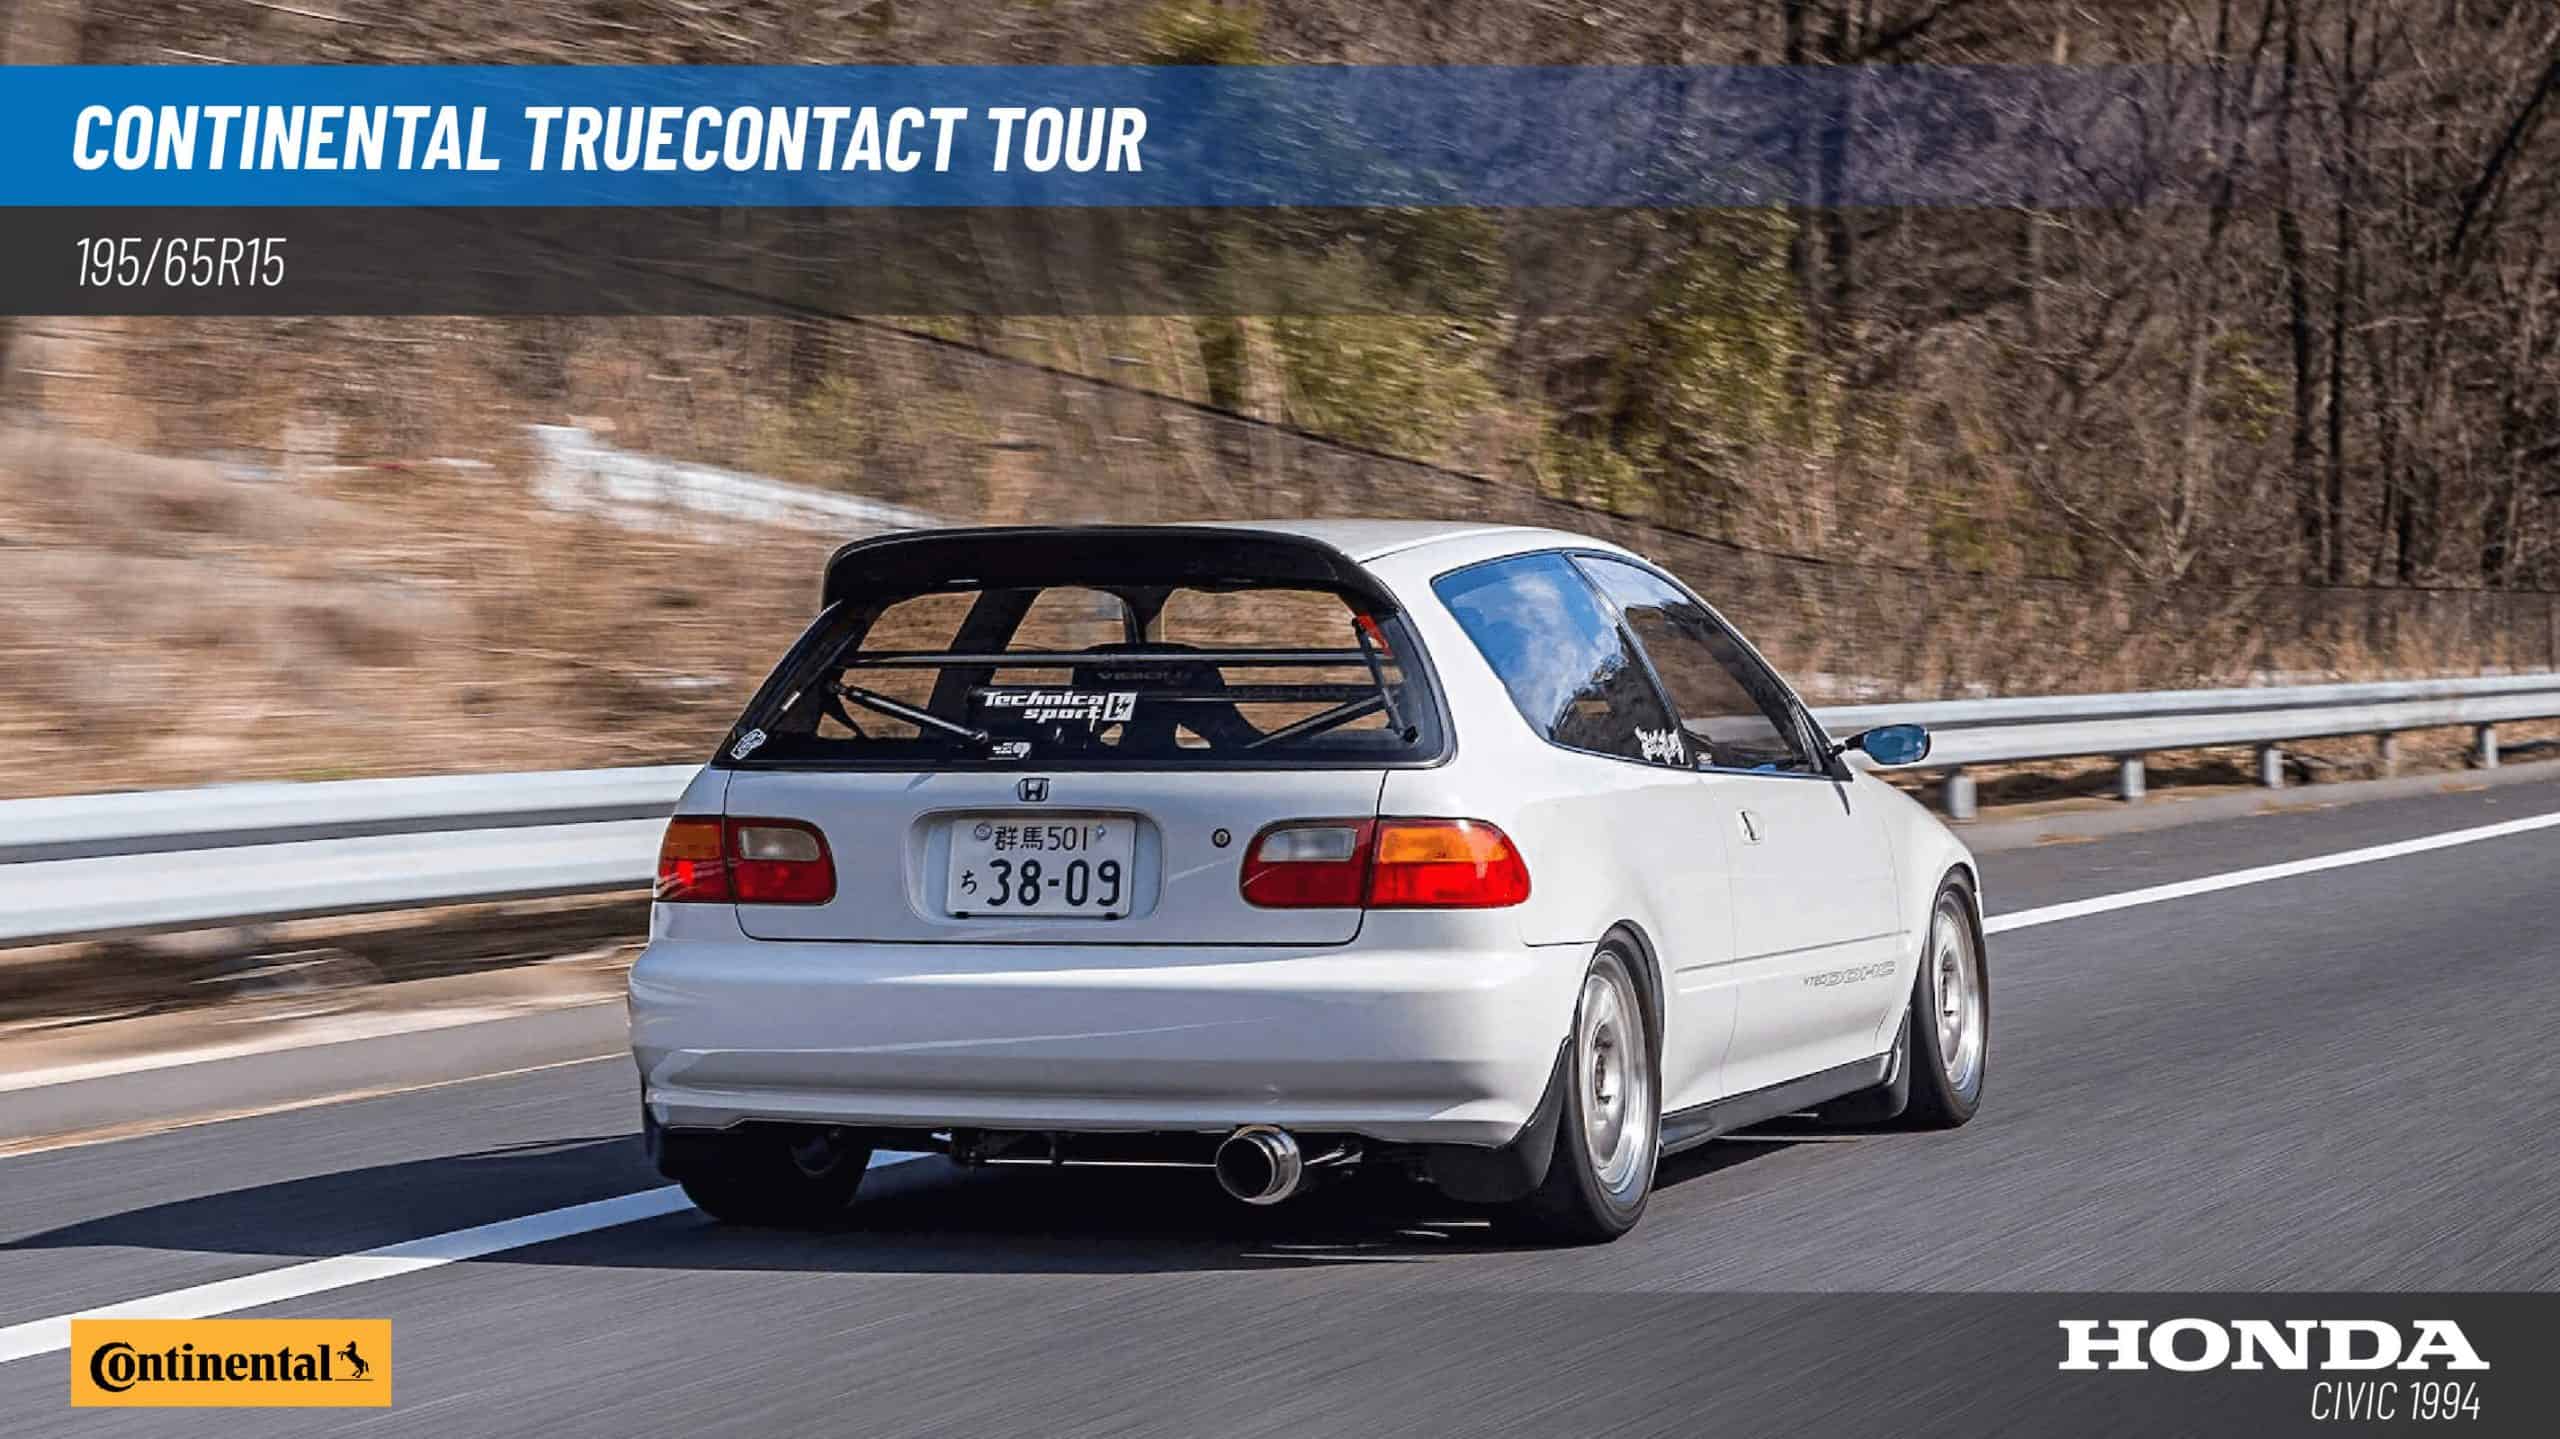 195/65R15 Honda Civic 1994 with Continental TrueContact Tour